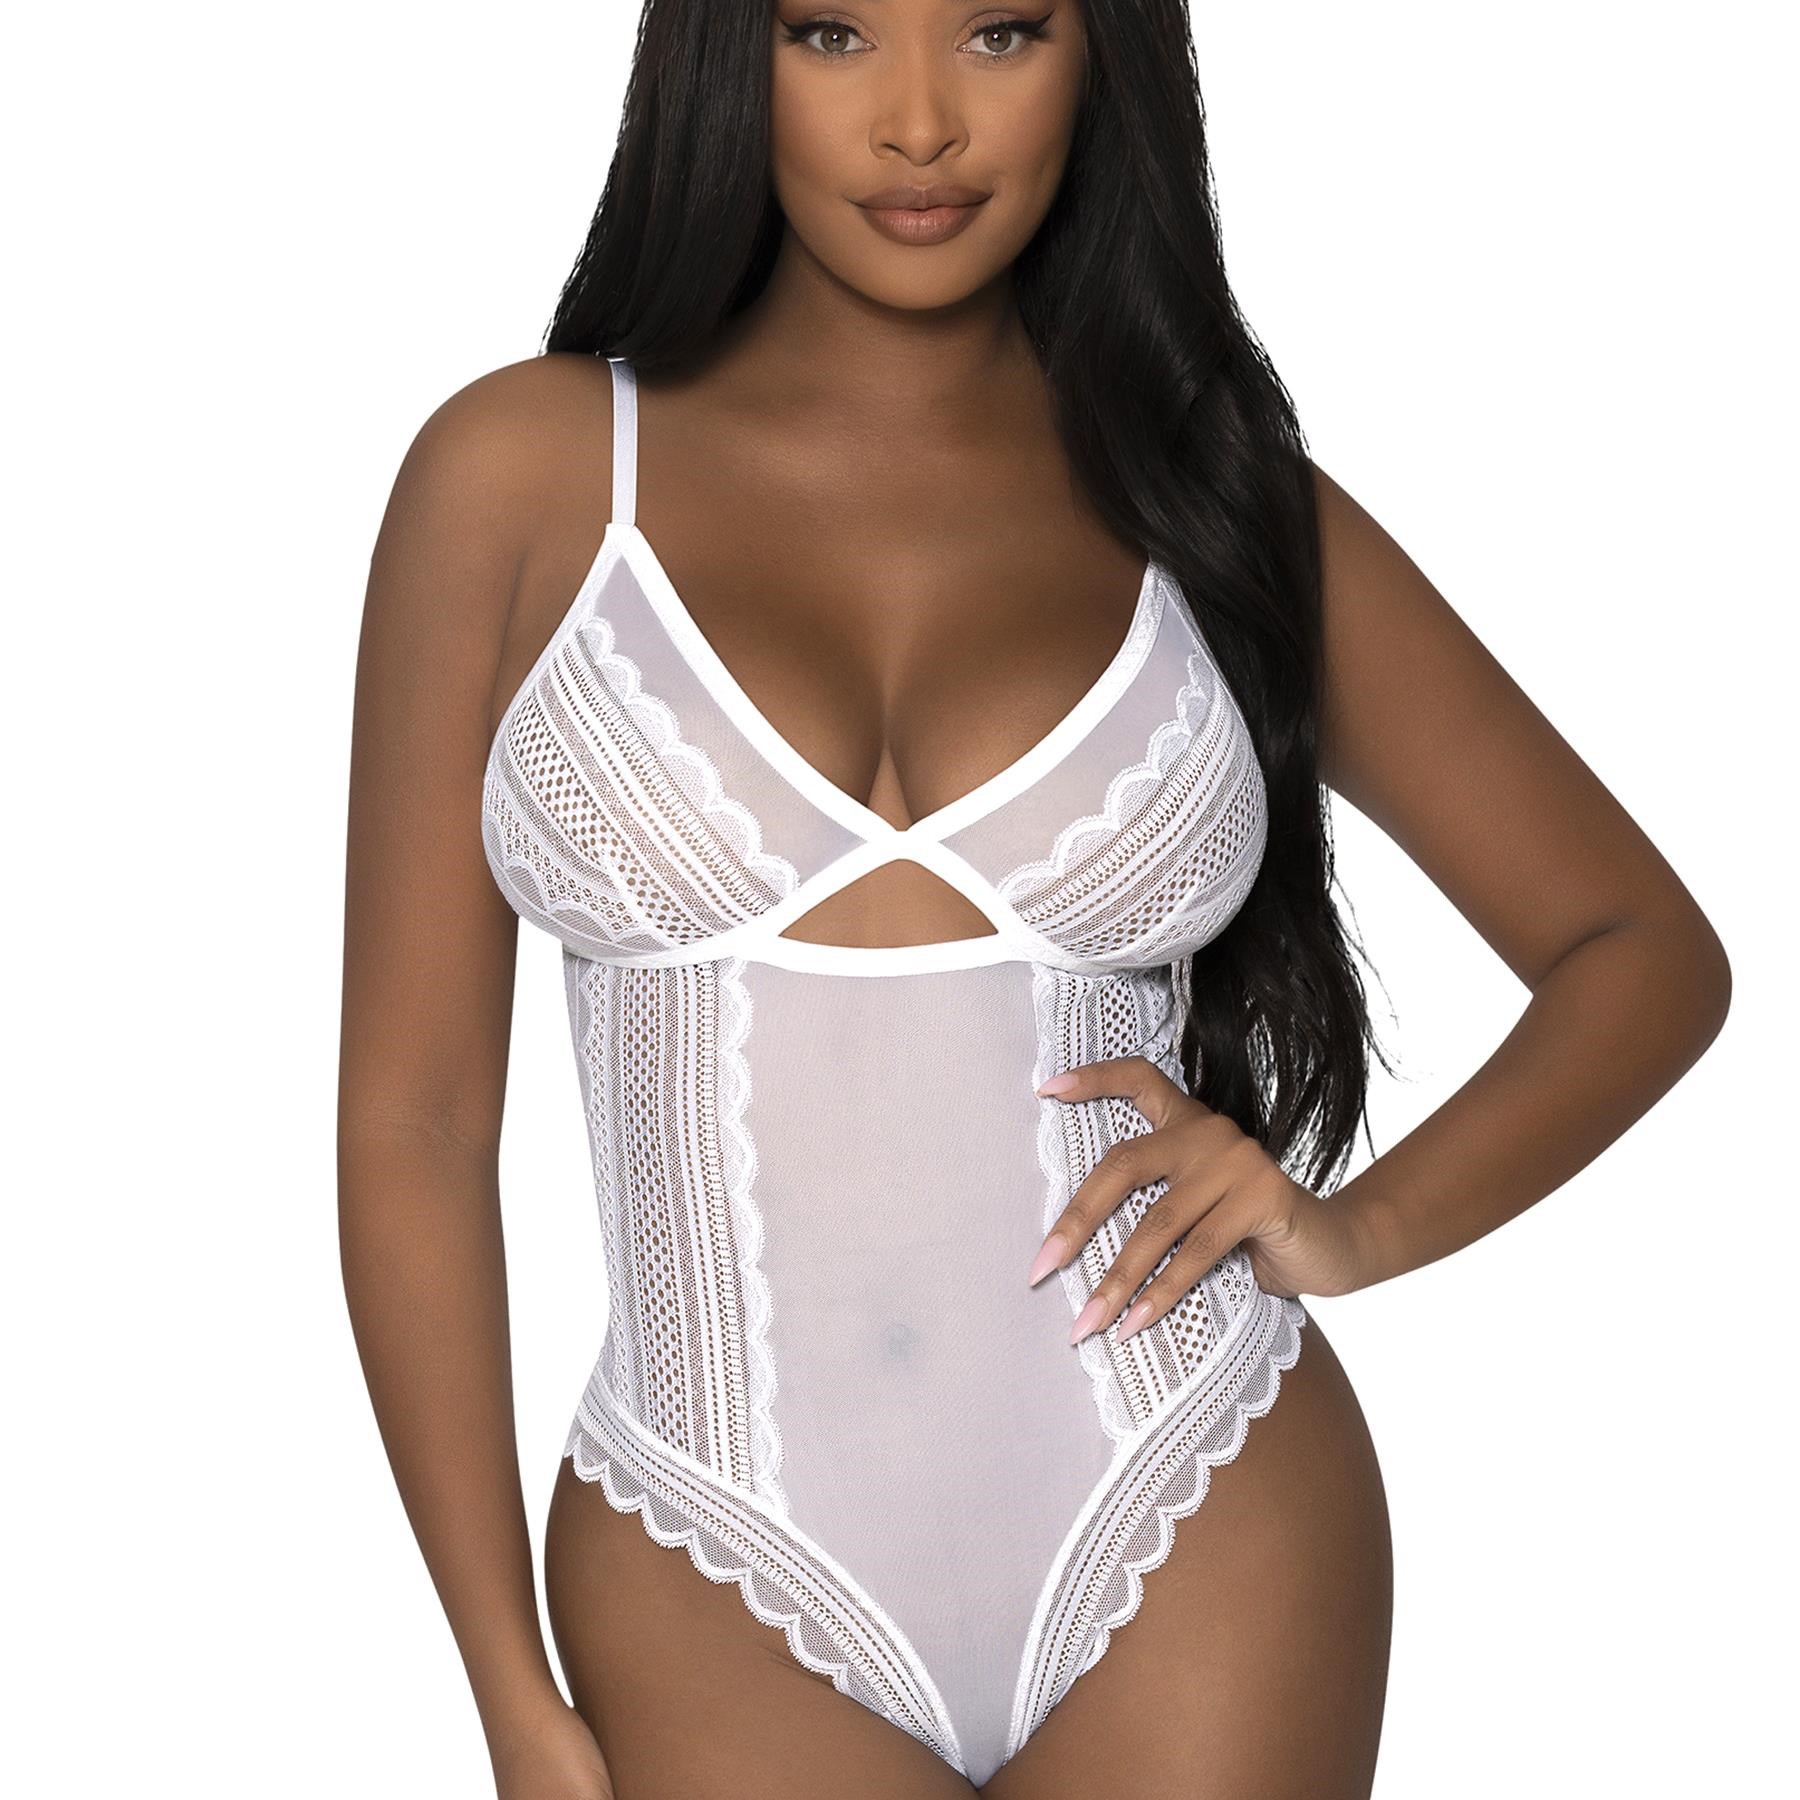 Modern Romance Cheeky teddy o/s front cropped